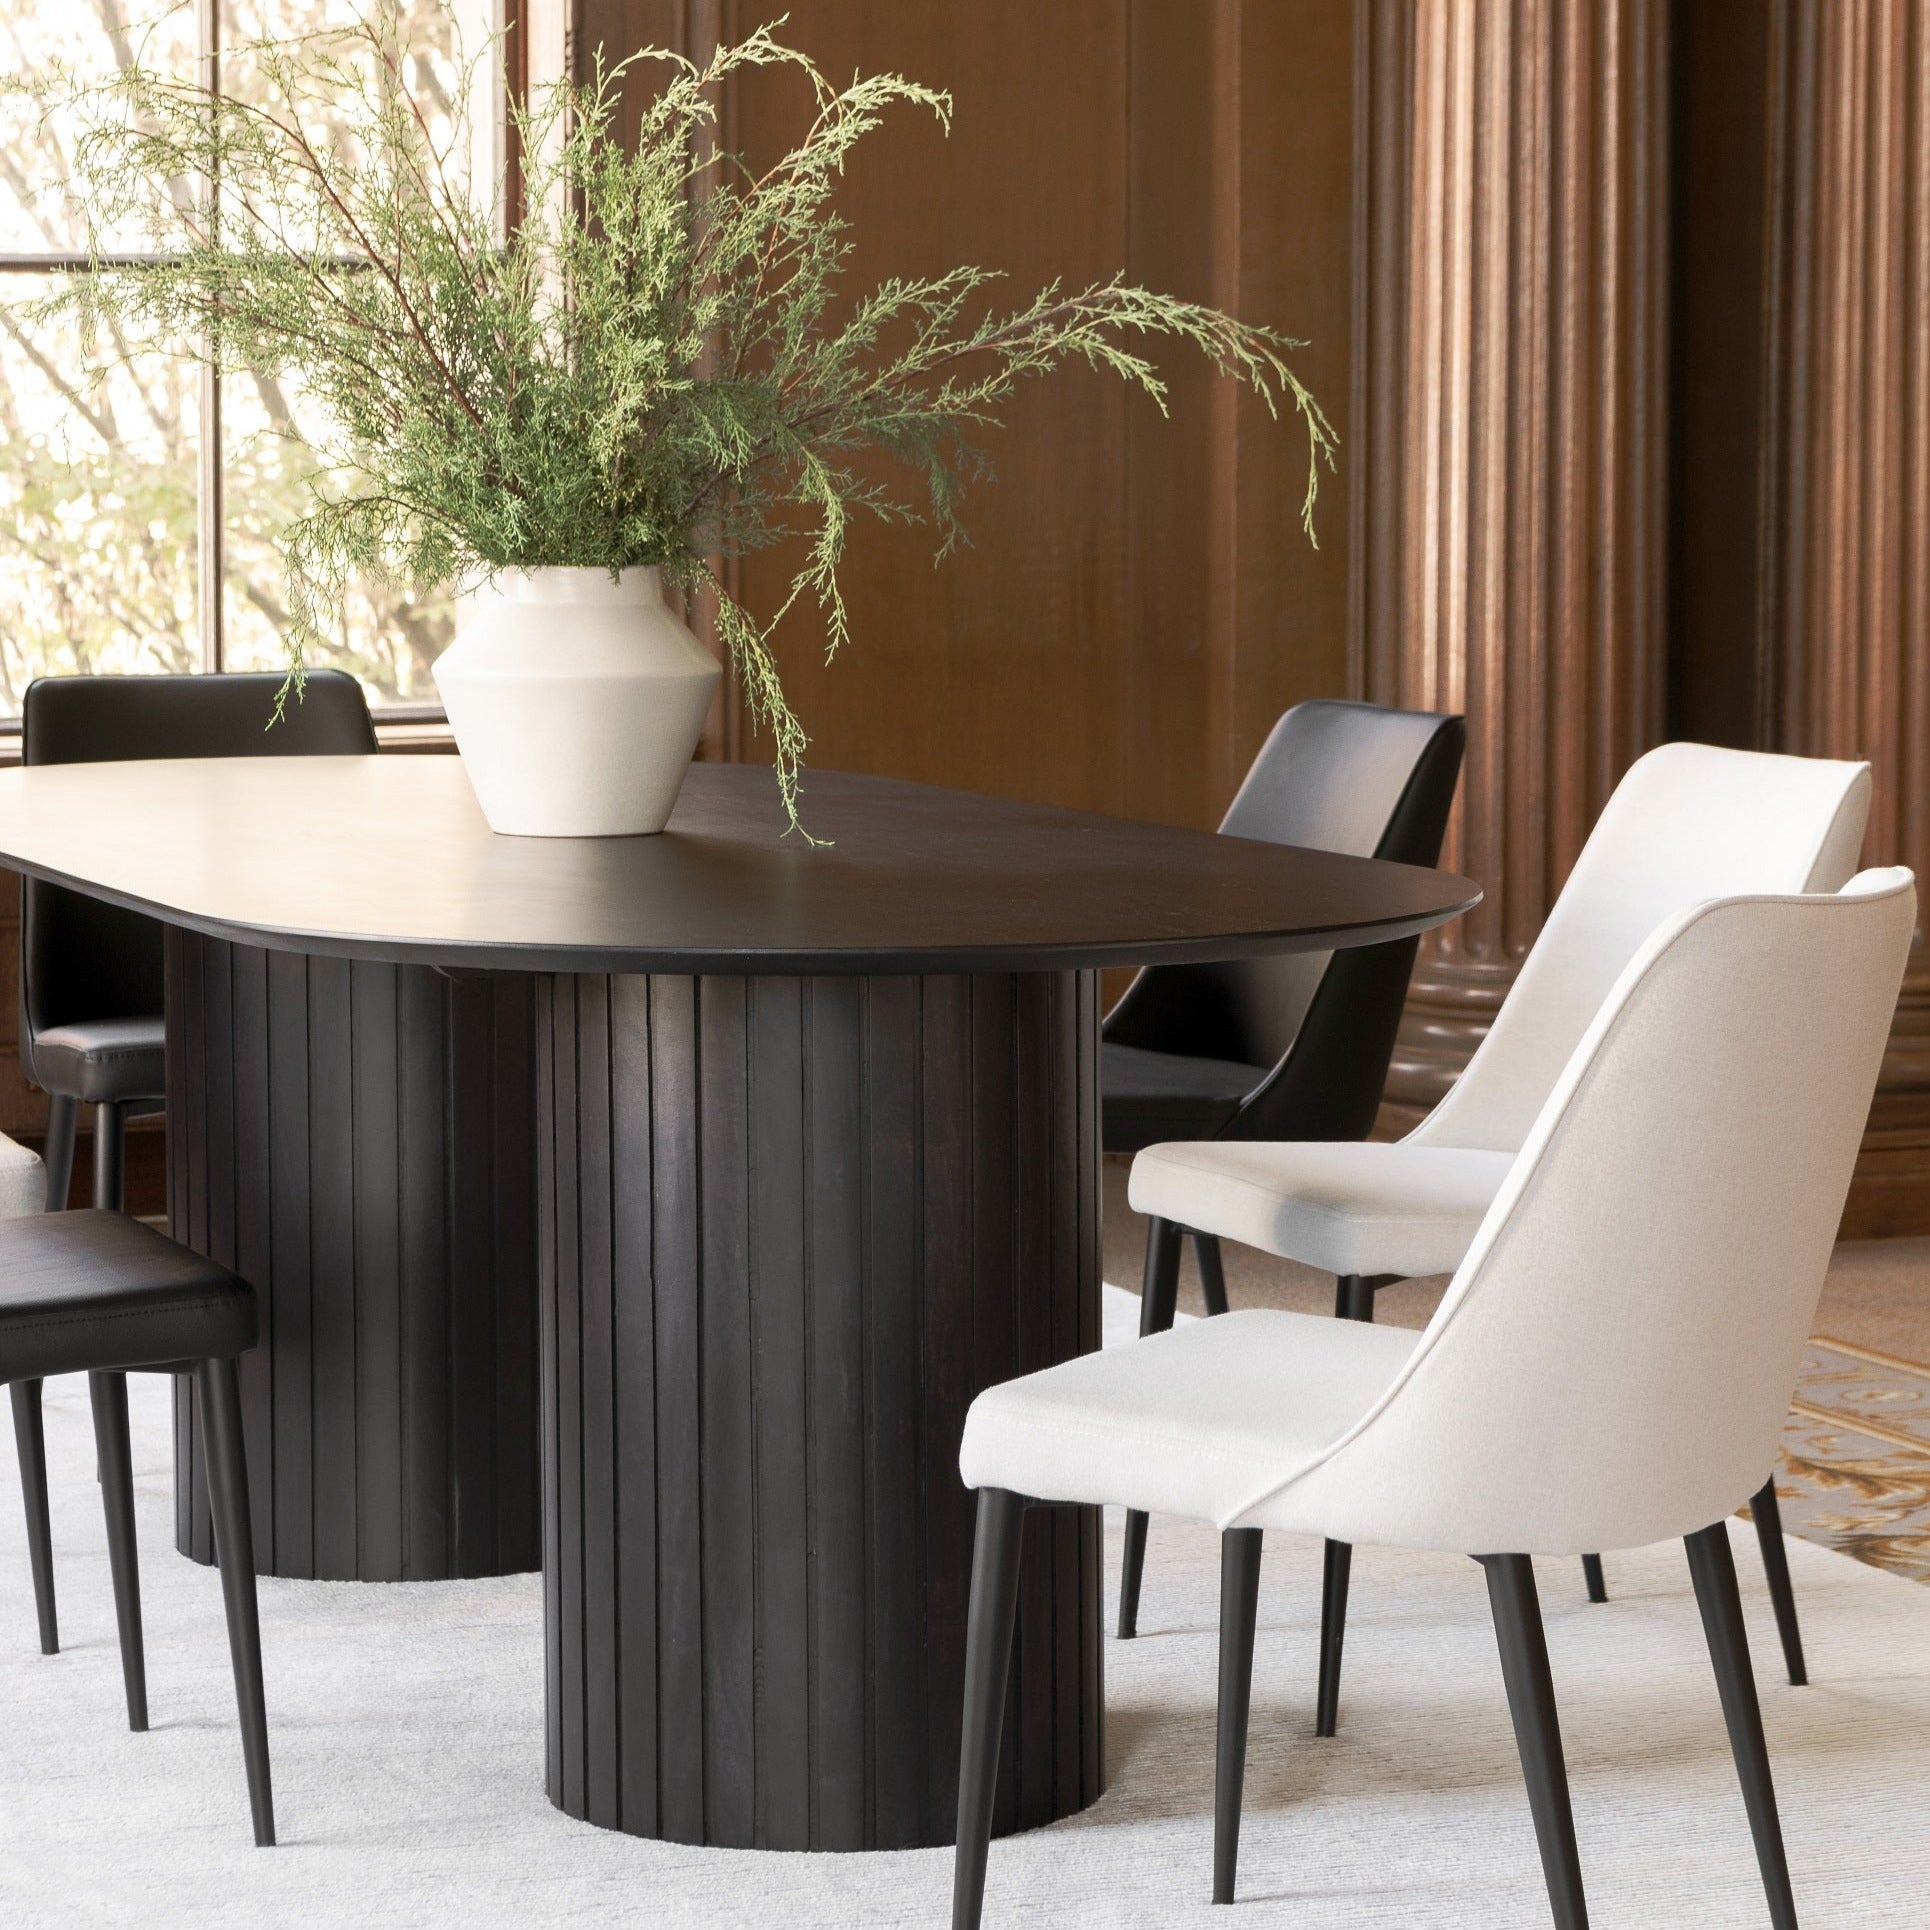 Aveline Dining Table